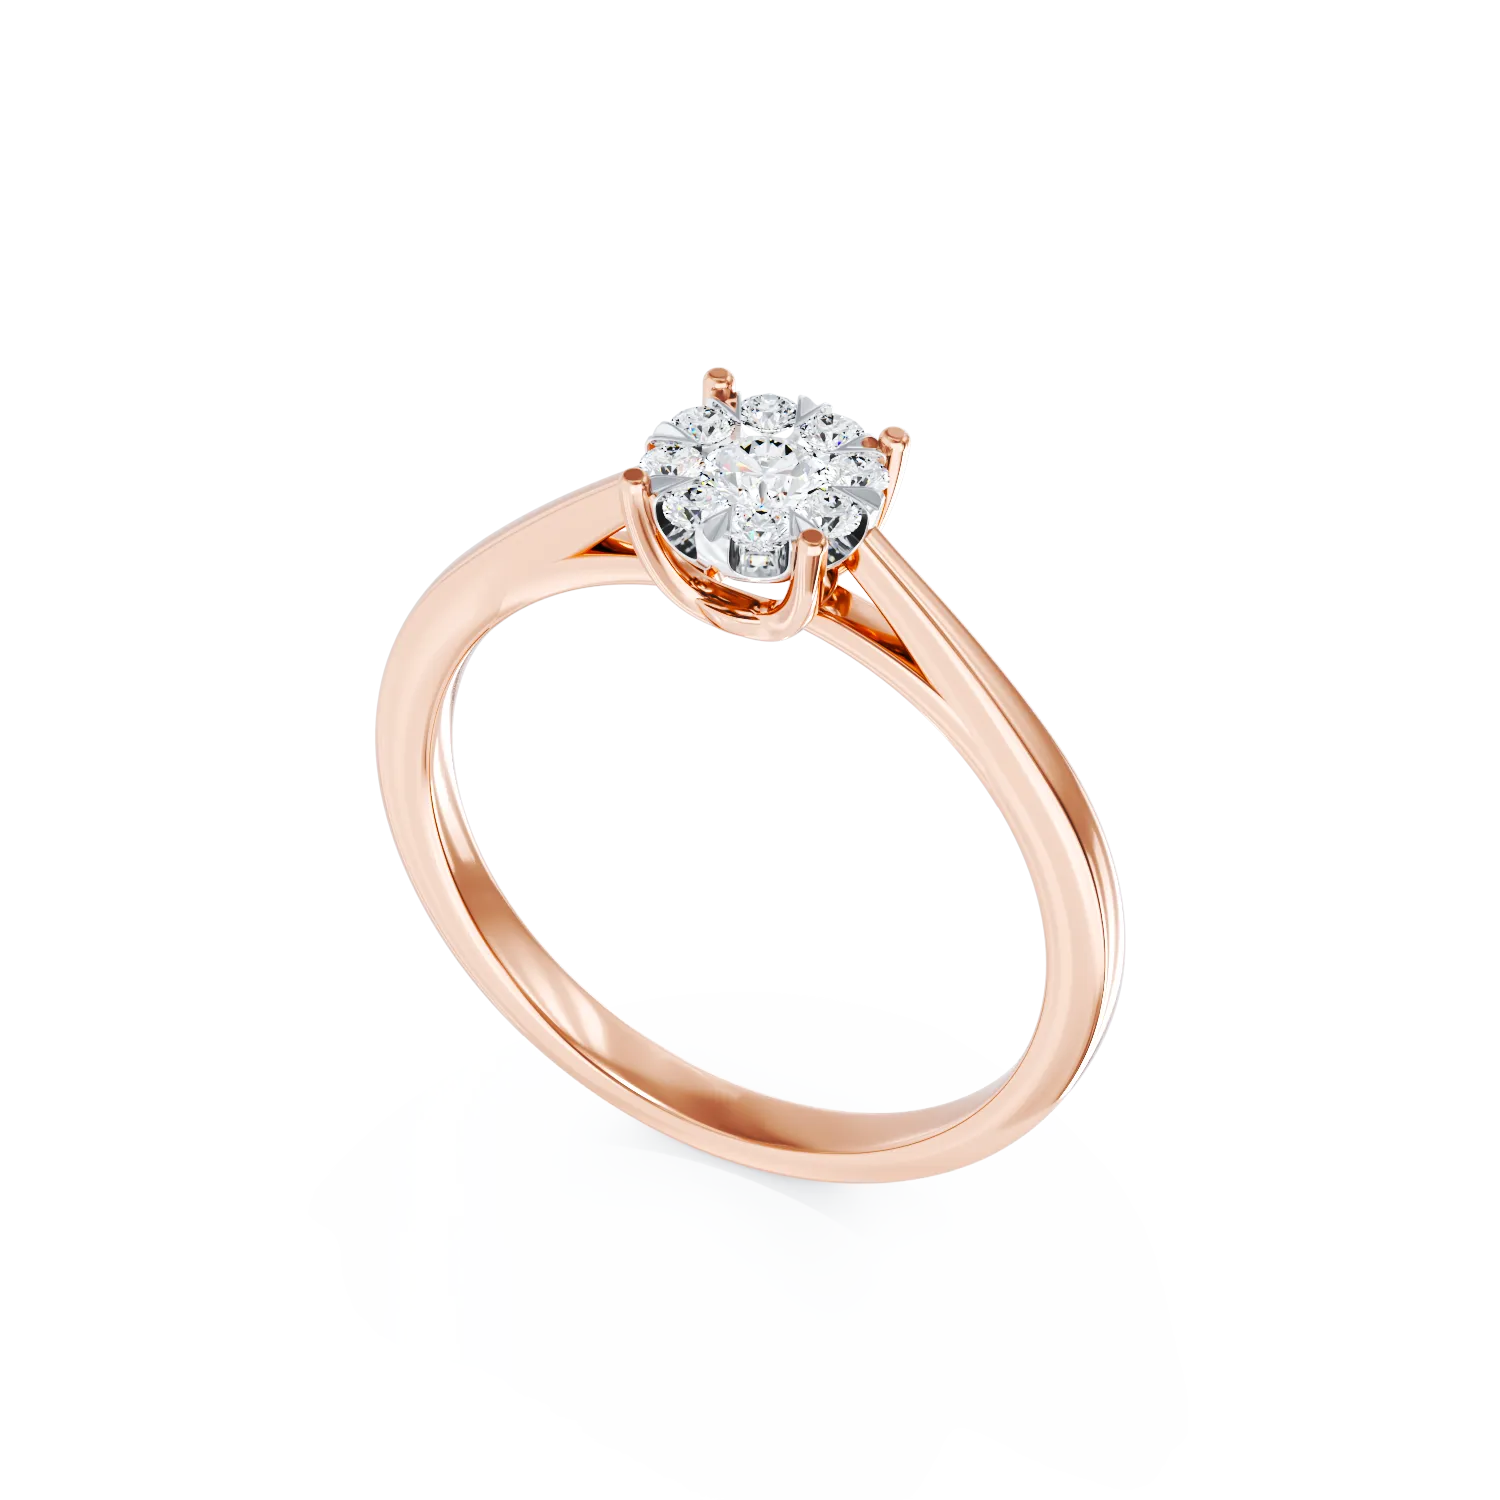 18K rose gold engagement ring with 0.255ct diamonds